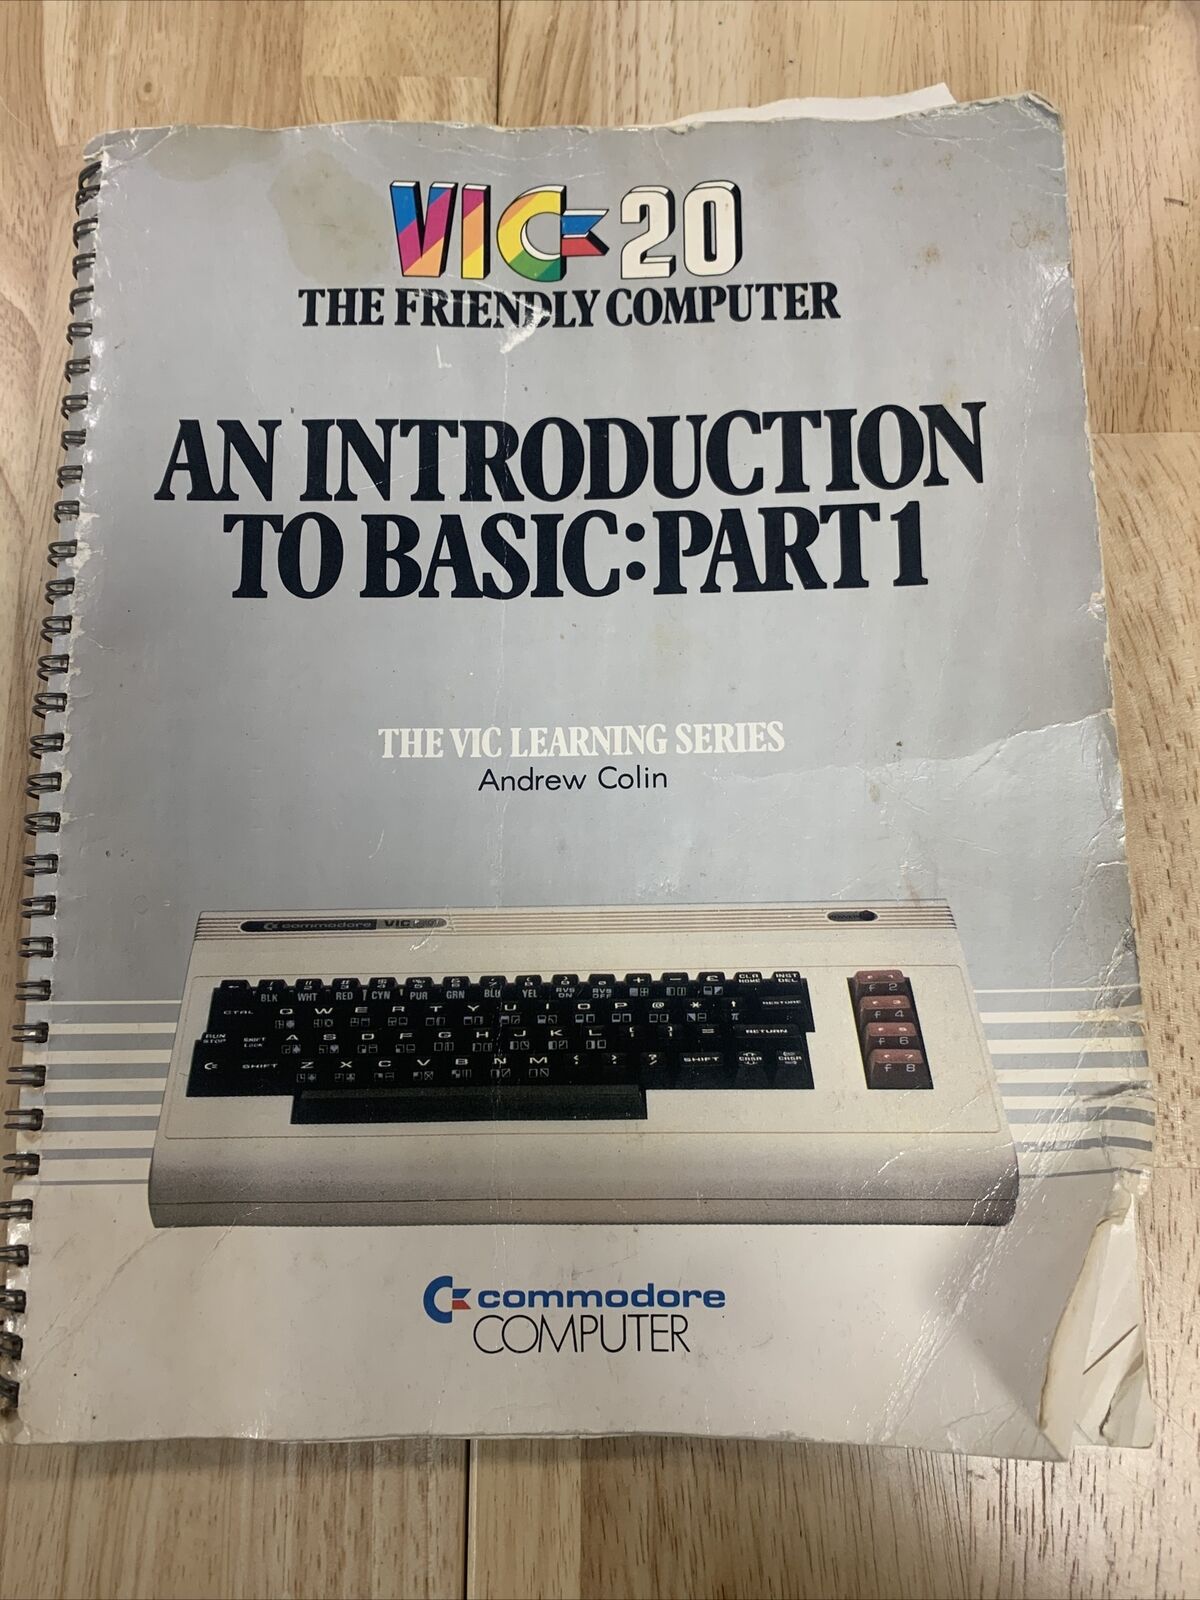 Vic 20 Computer An Introduction to Basic: Part 1 Andrew Collin 1981